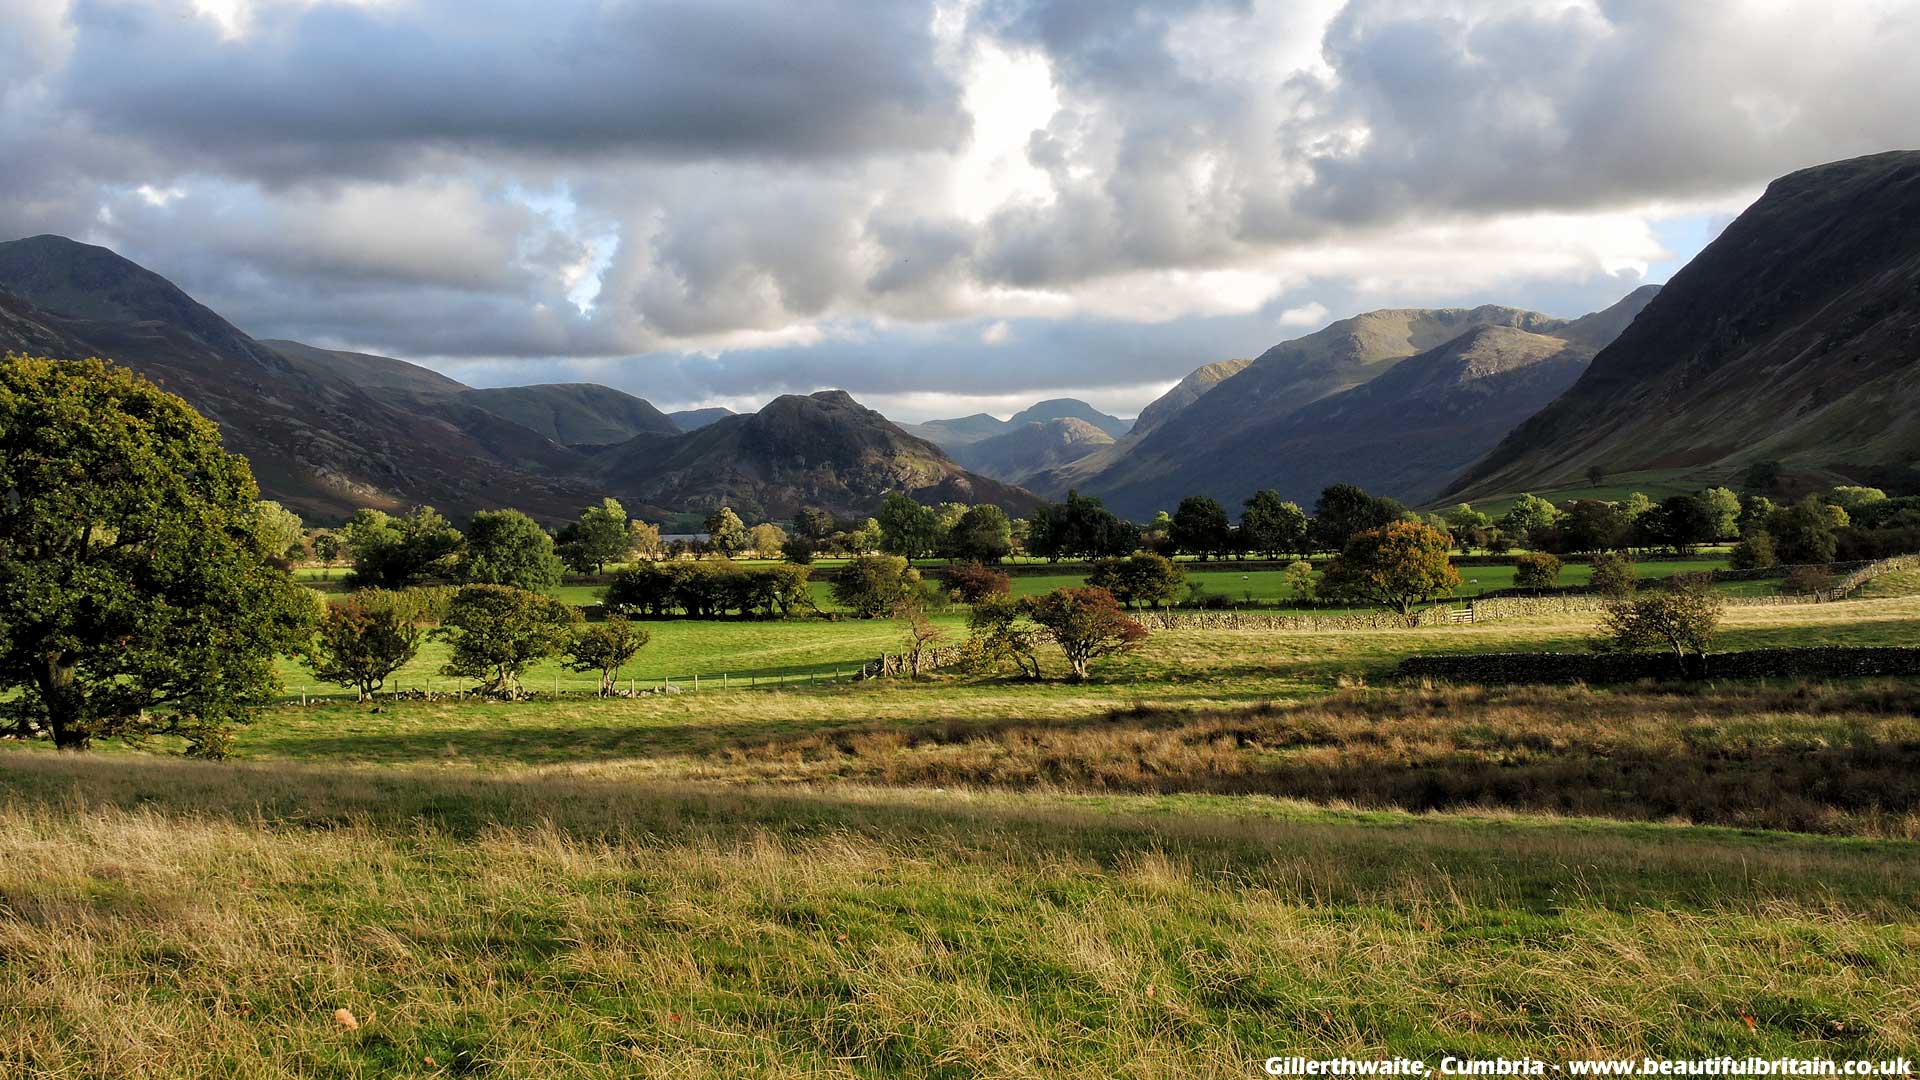 The British Countryside - Desktop Scenery Wallpaper - Photographs of ...